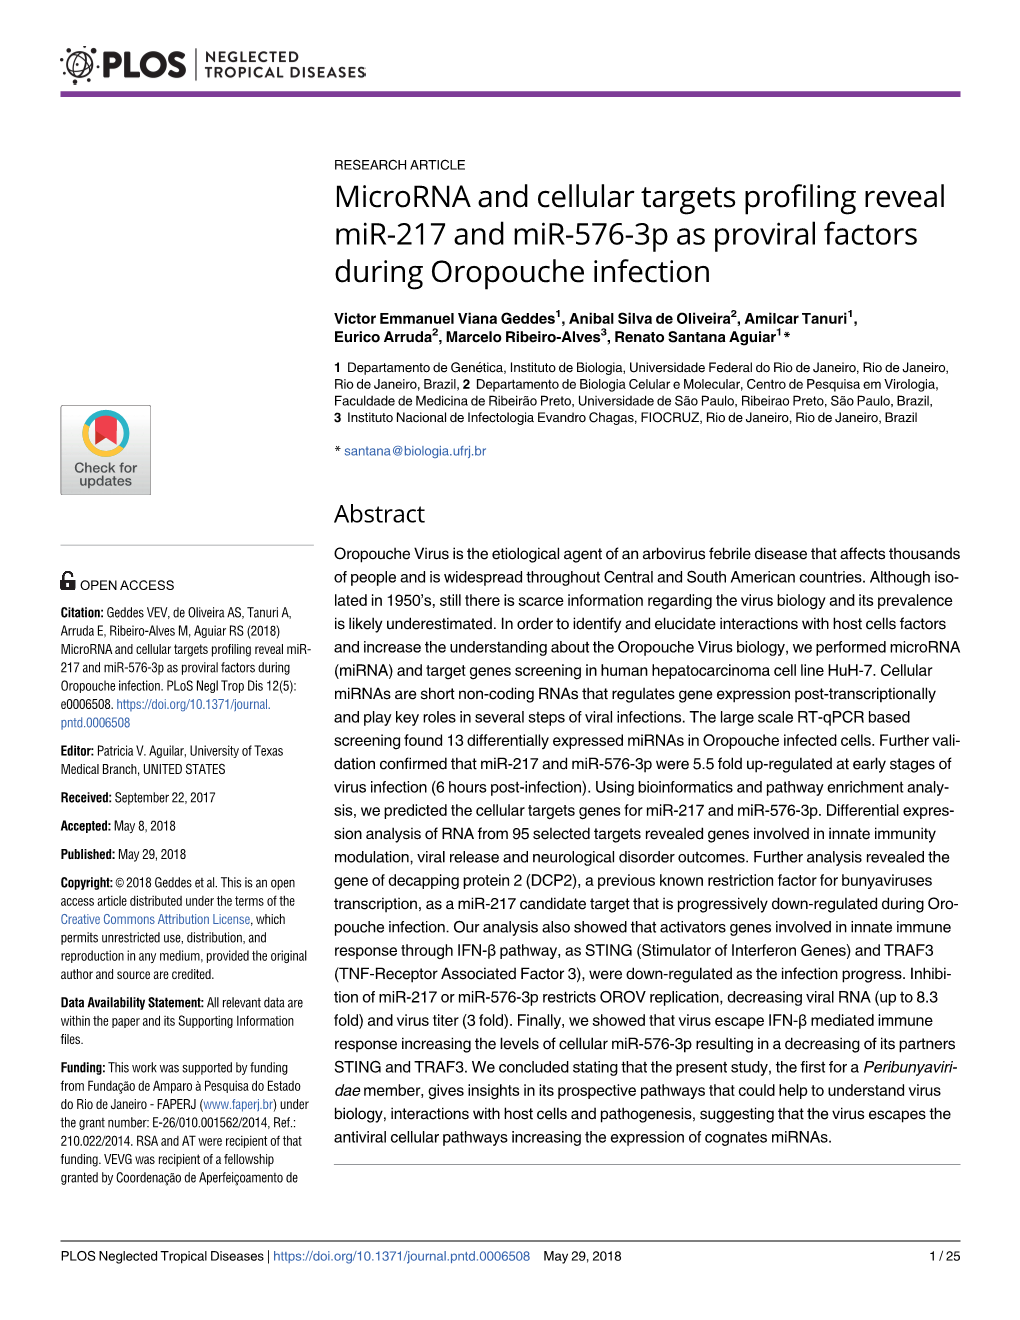 Microrna and Cellular Targets Profiling Reveal Mir-217 and Mir-576-3P As Proviral Factors During Oropouche Infection